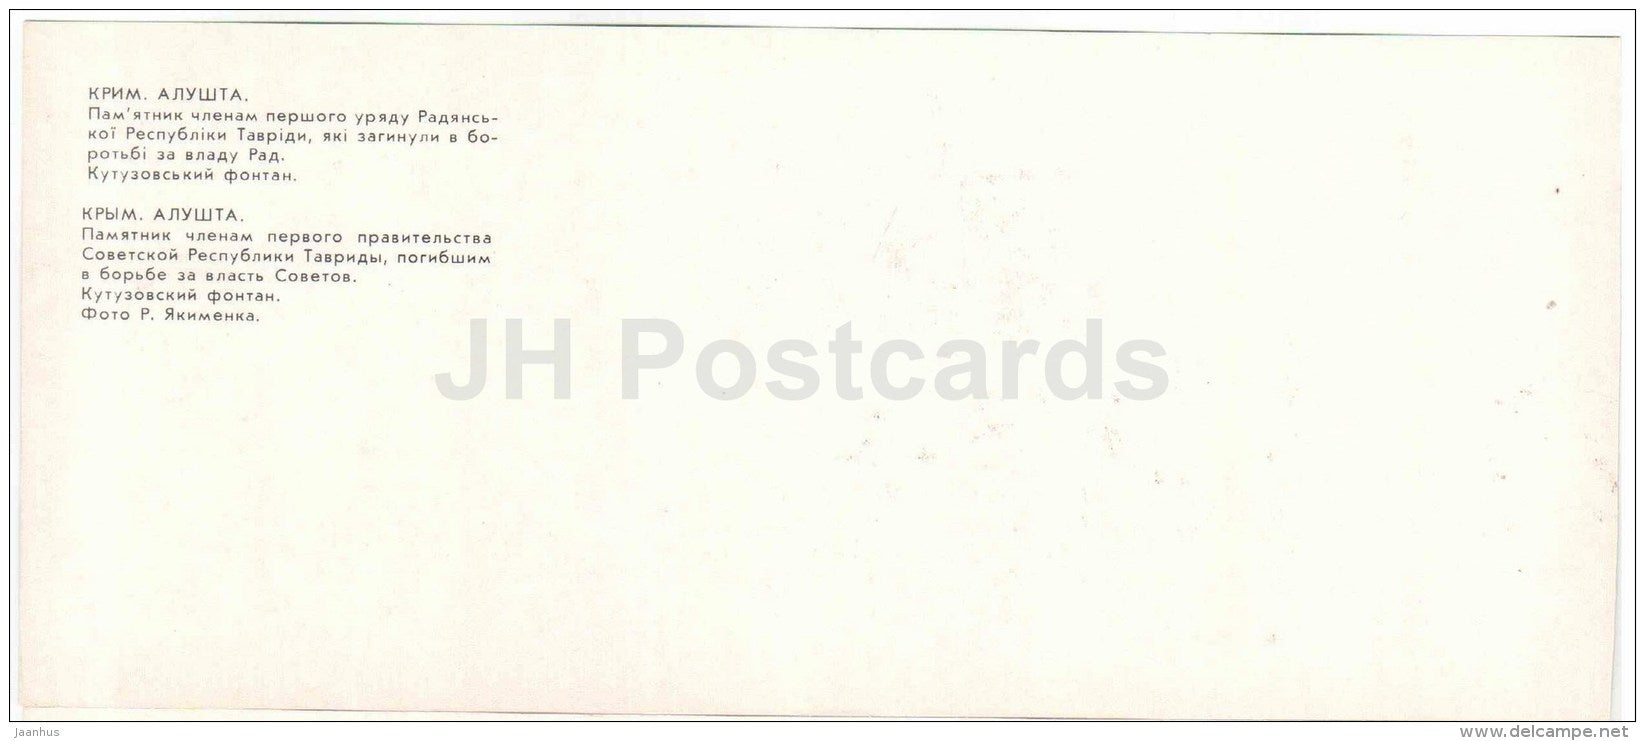 a monument to the members of the first government of Tauris - Alushta - Crimea - 1981 - Ukraine USSR - unused - JH Postcards